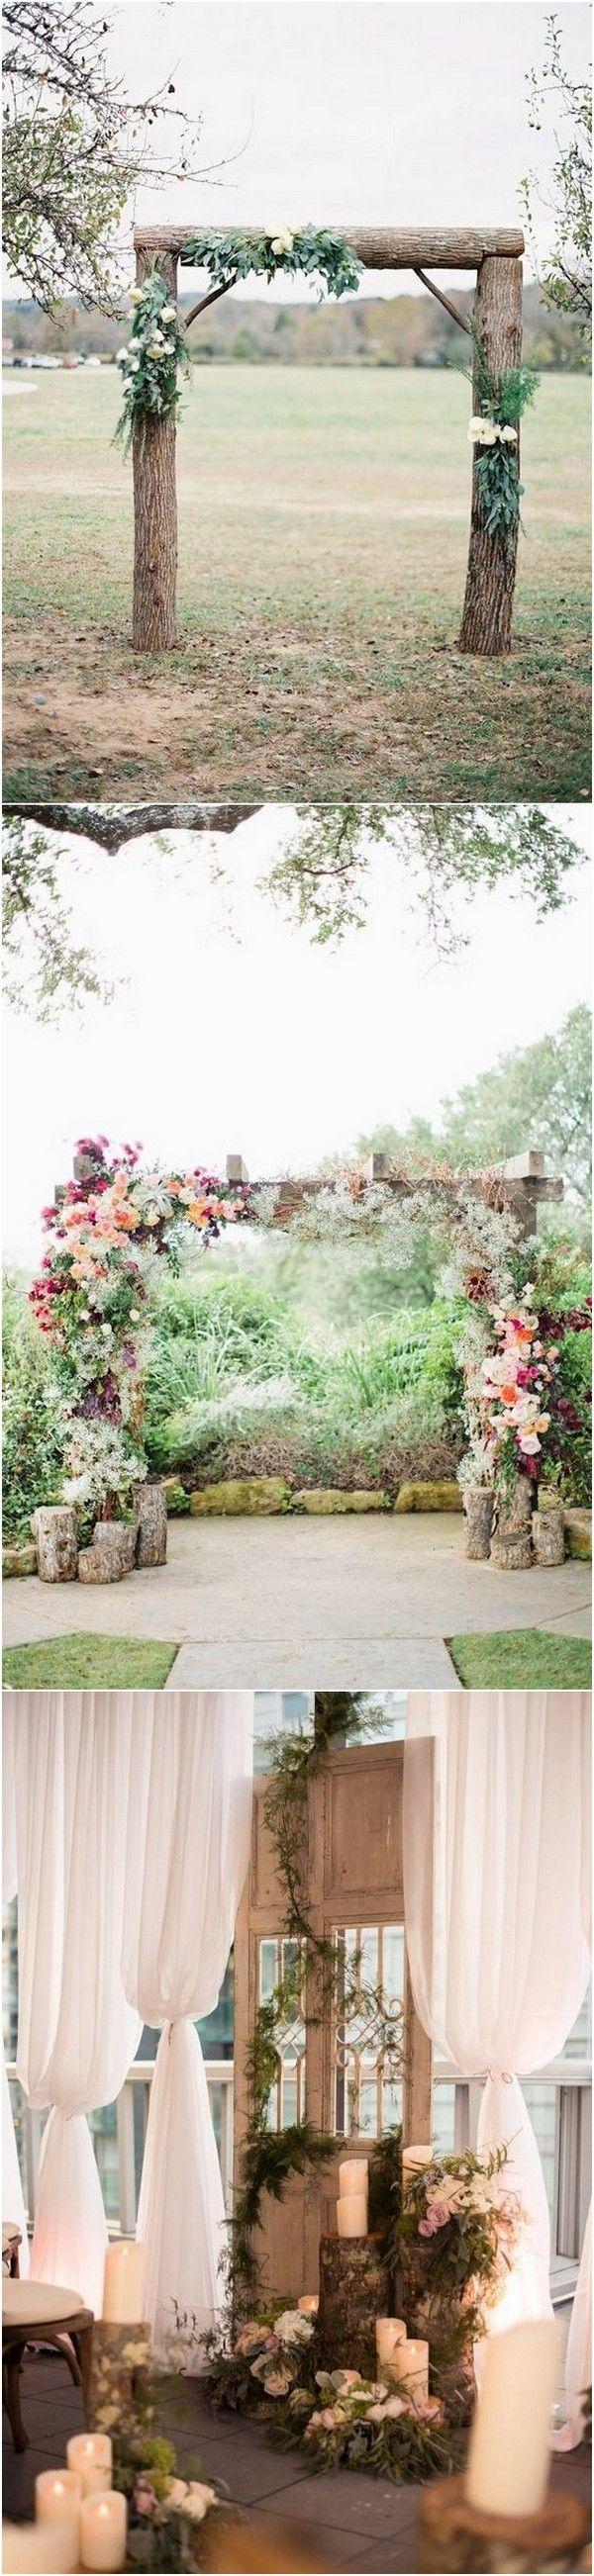 Wedding - 28 Country Rustic Wedding Decoration Ideas With Tree Stumps - Page 4 Of 4